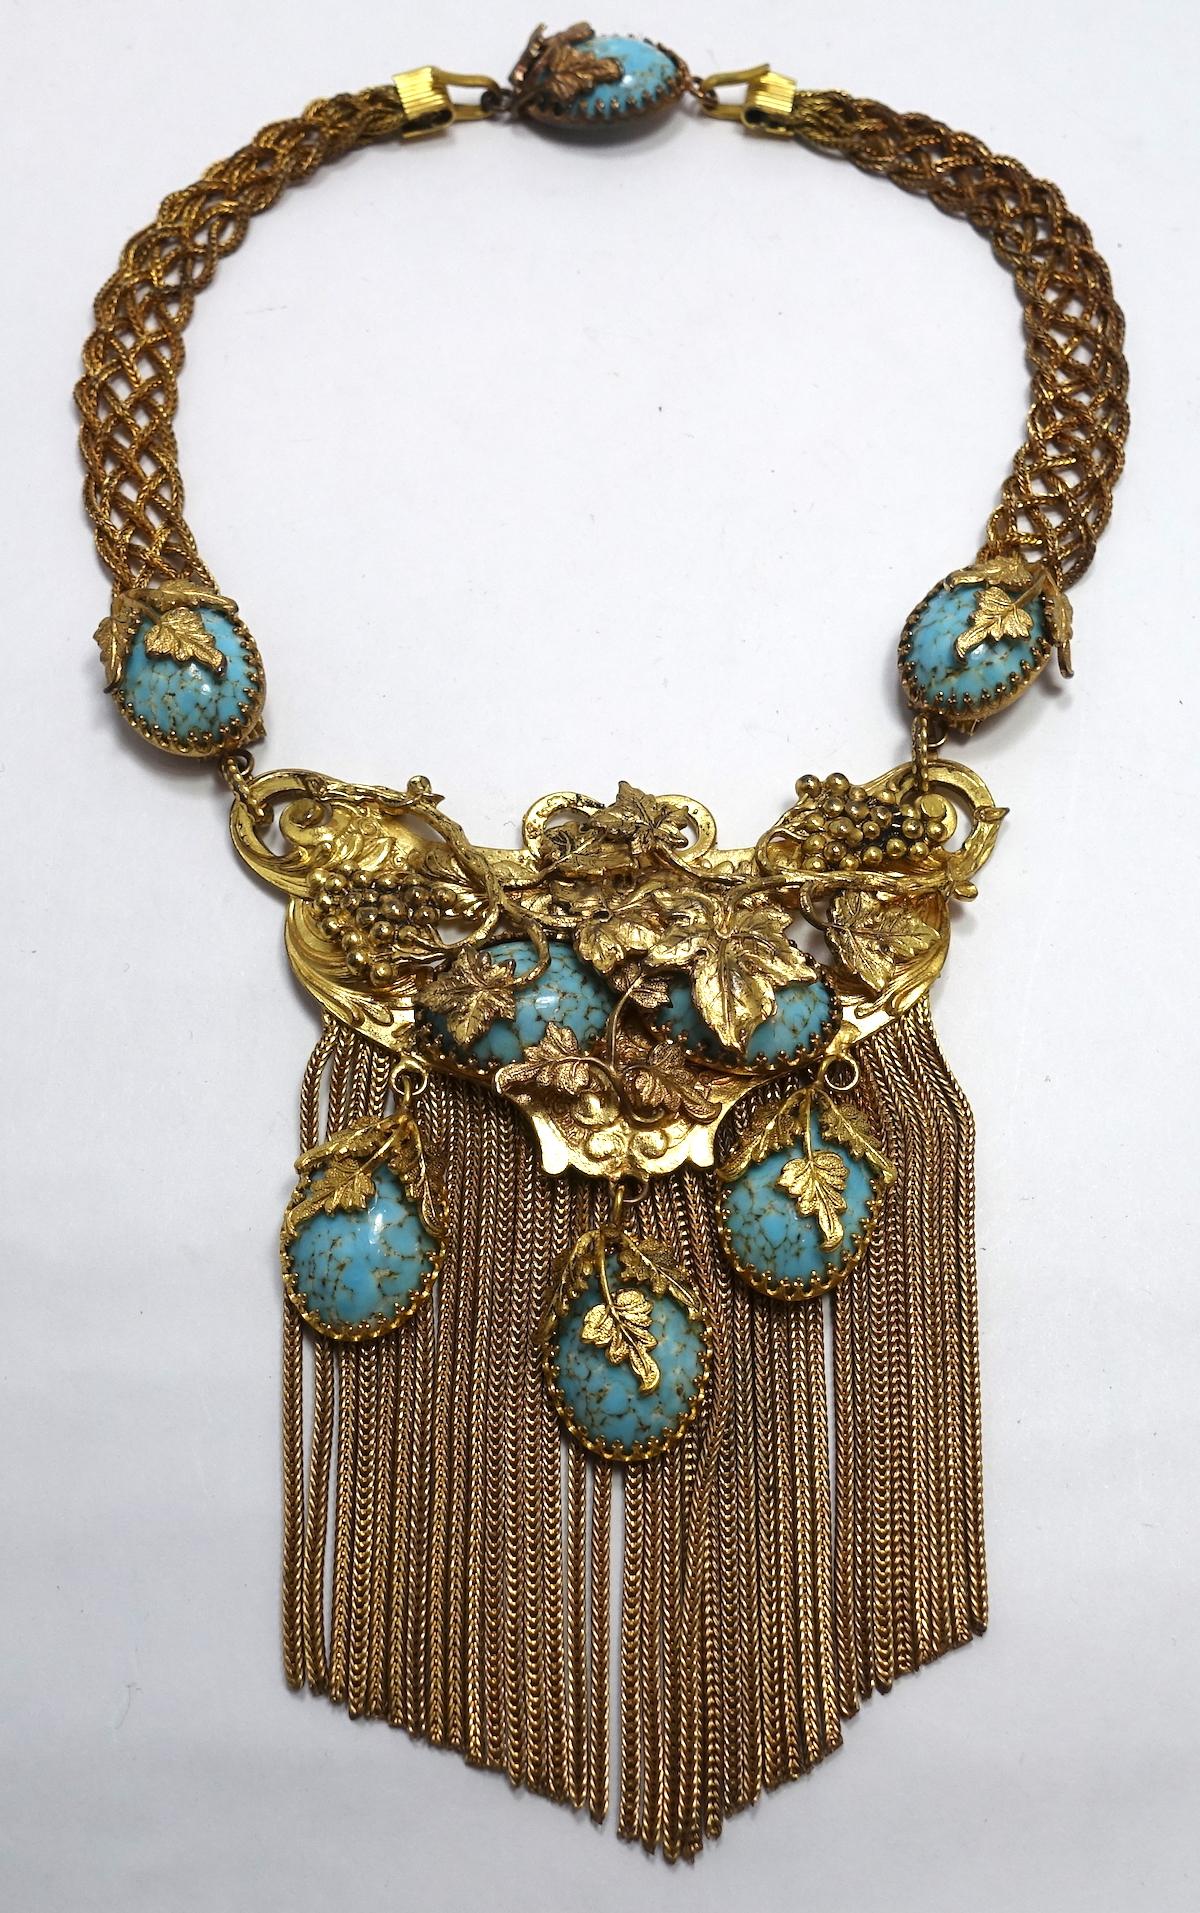 Victorian Vintage Faux Turquoise Dangling Necklace im Zustand „Gut“ im Angebot in New York, NY